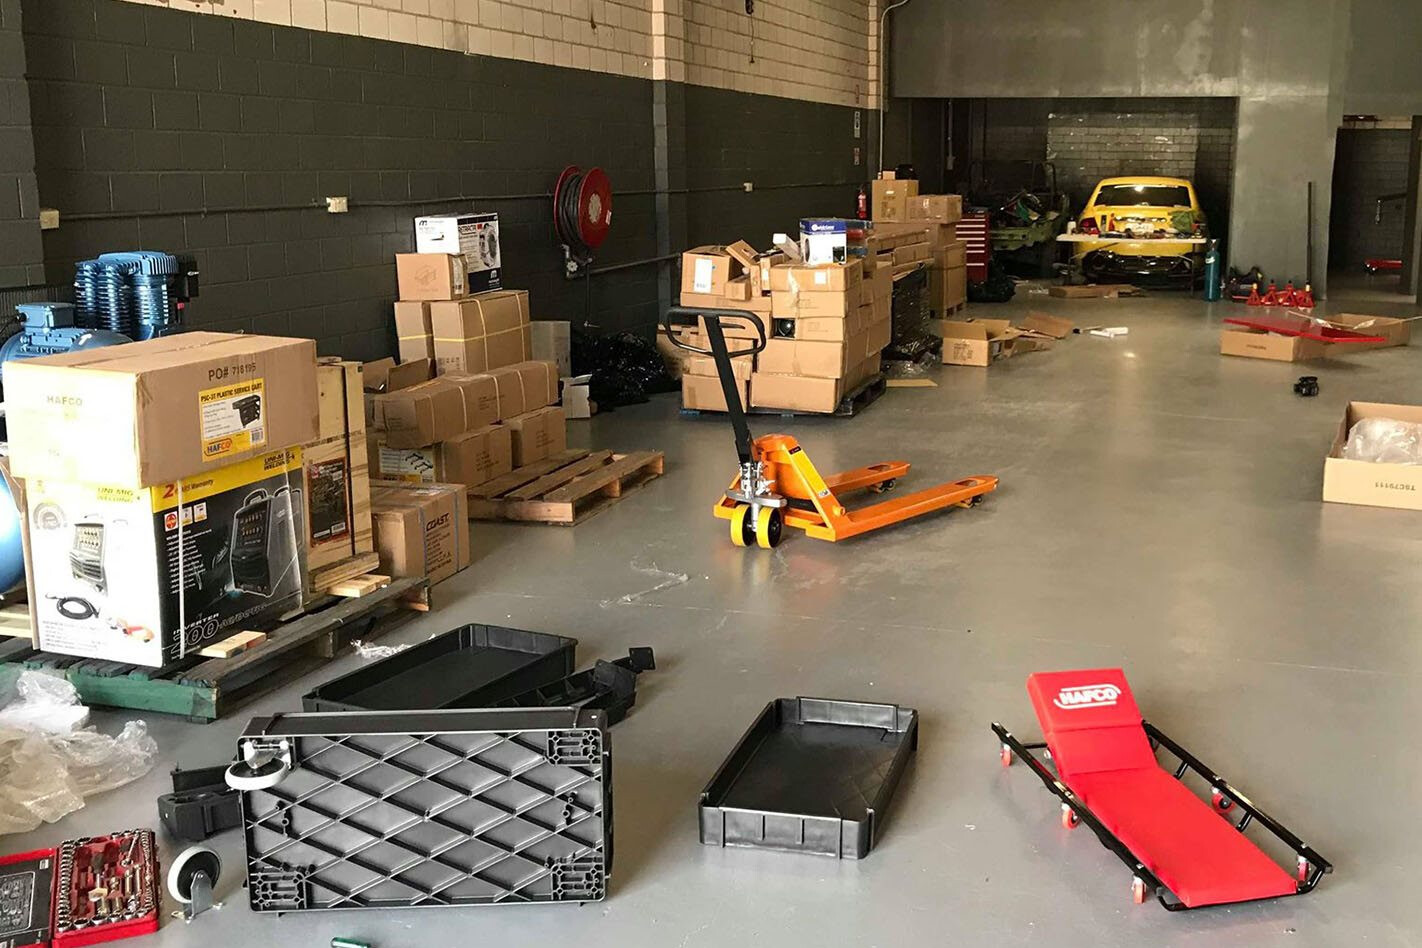 We get our new workshop equipment – Carnage Plus